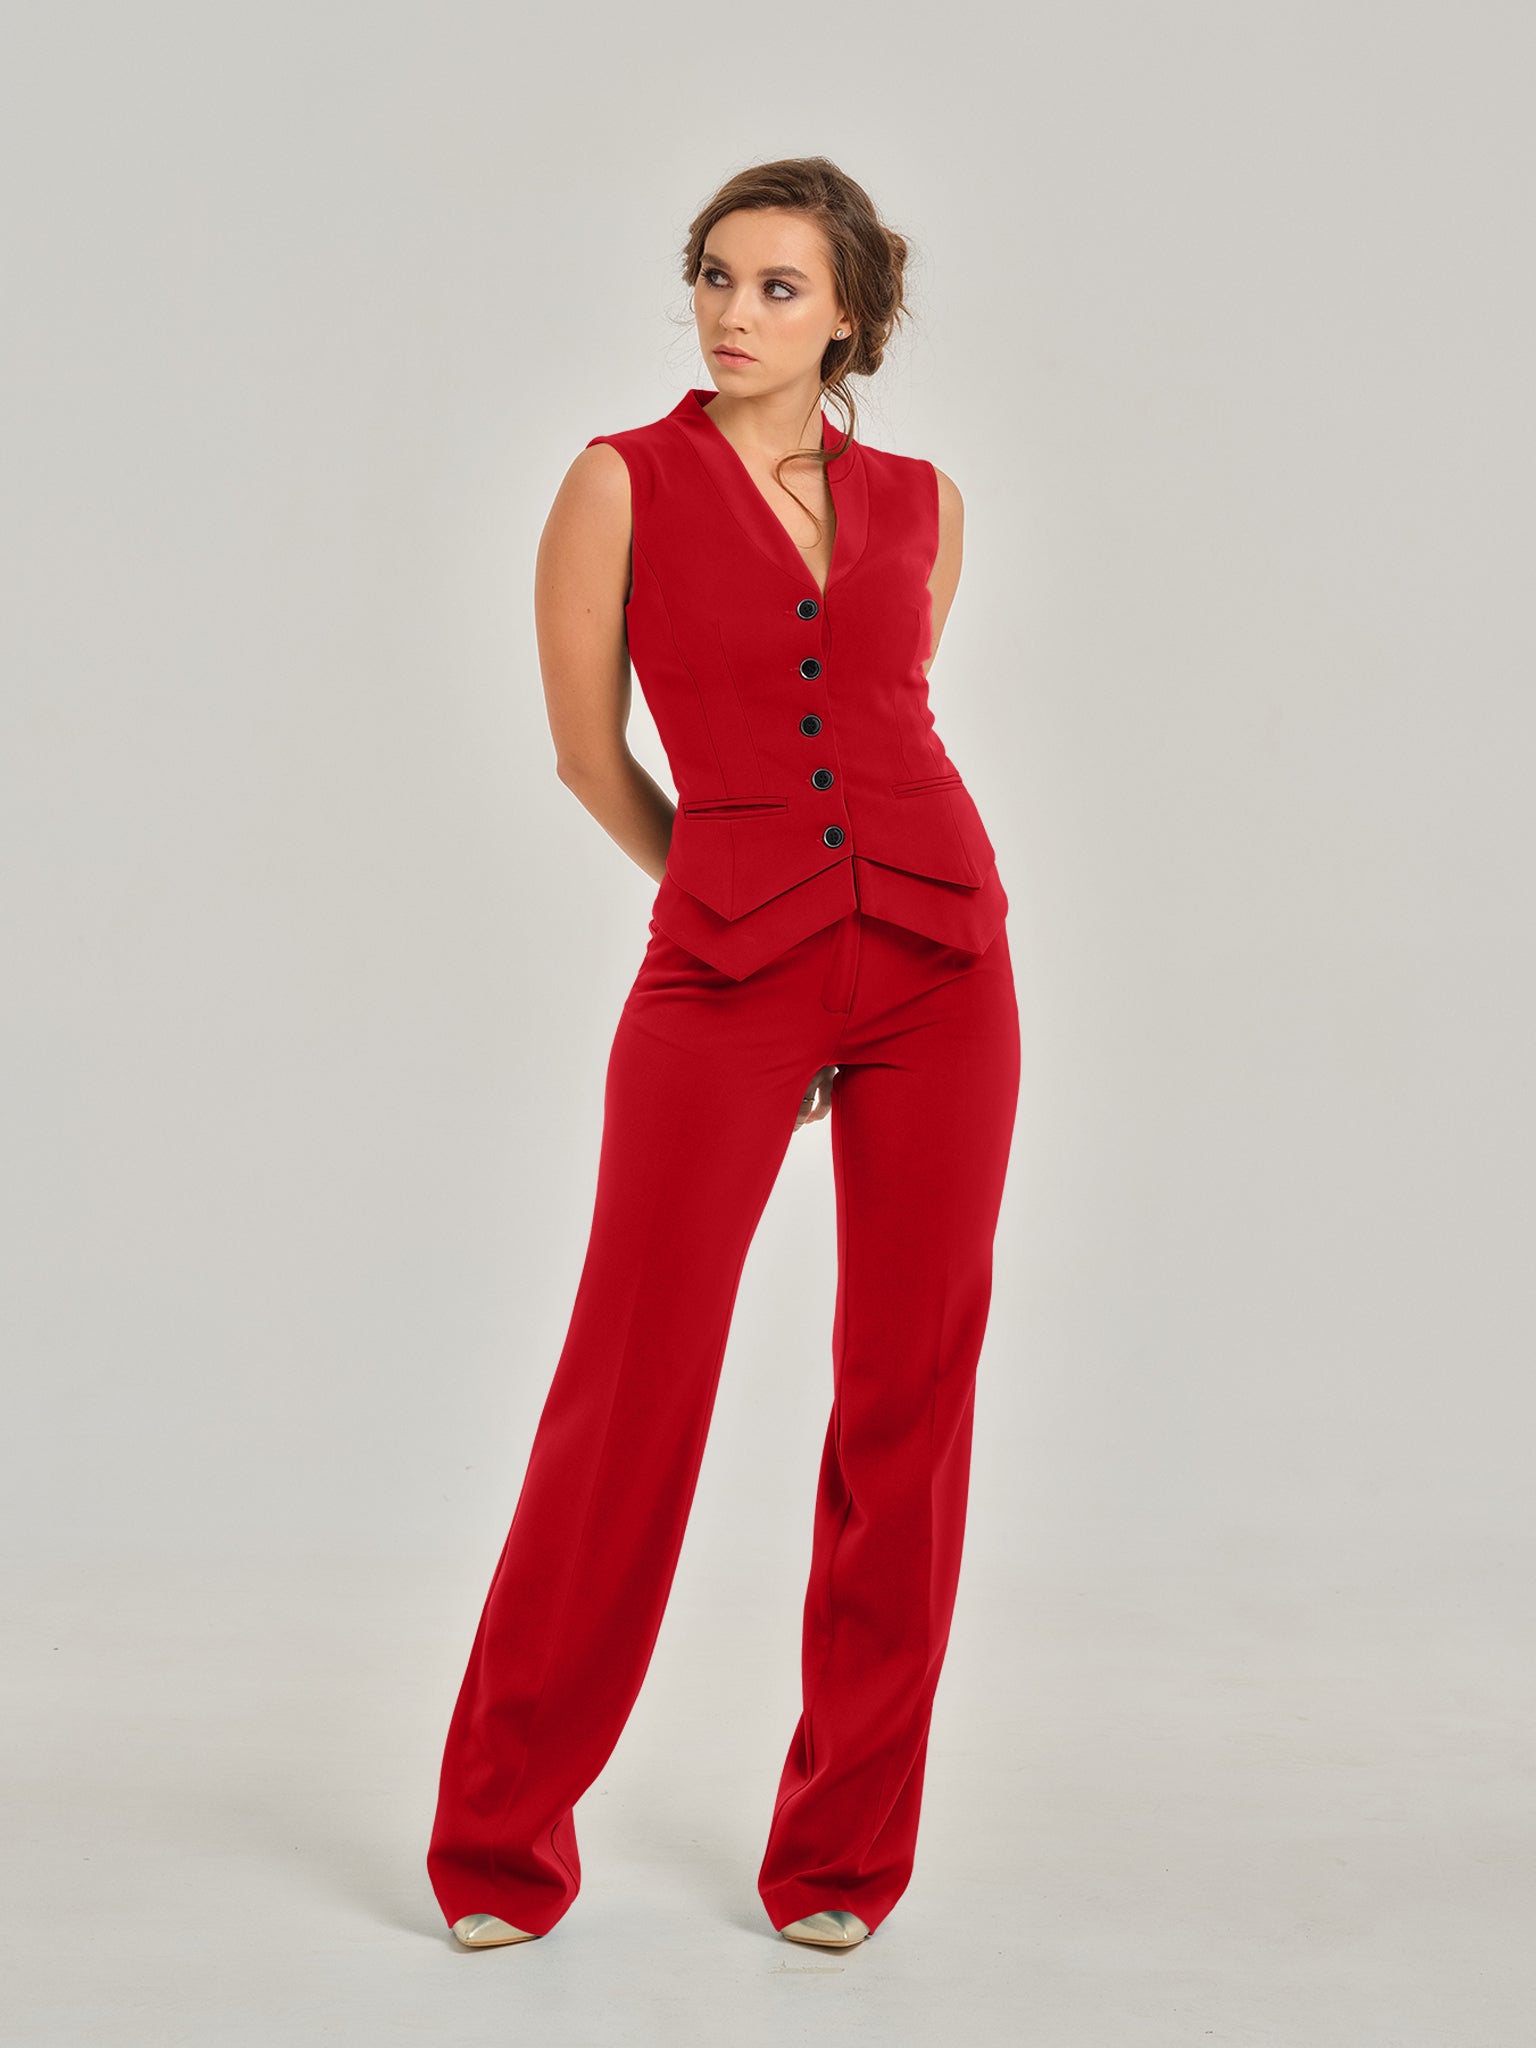 Fierce Red Fitted Single-Breasted Waistcoat by Tia Dorraine Women's Luxury Fashion Designer Clothing Brand